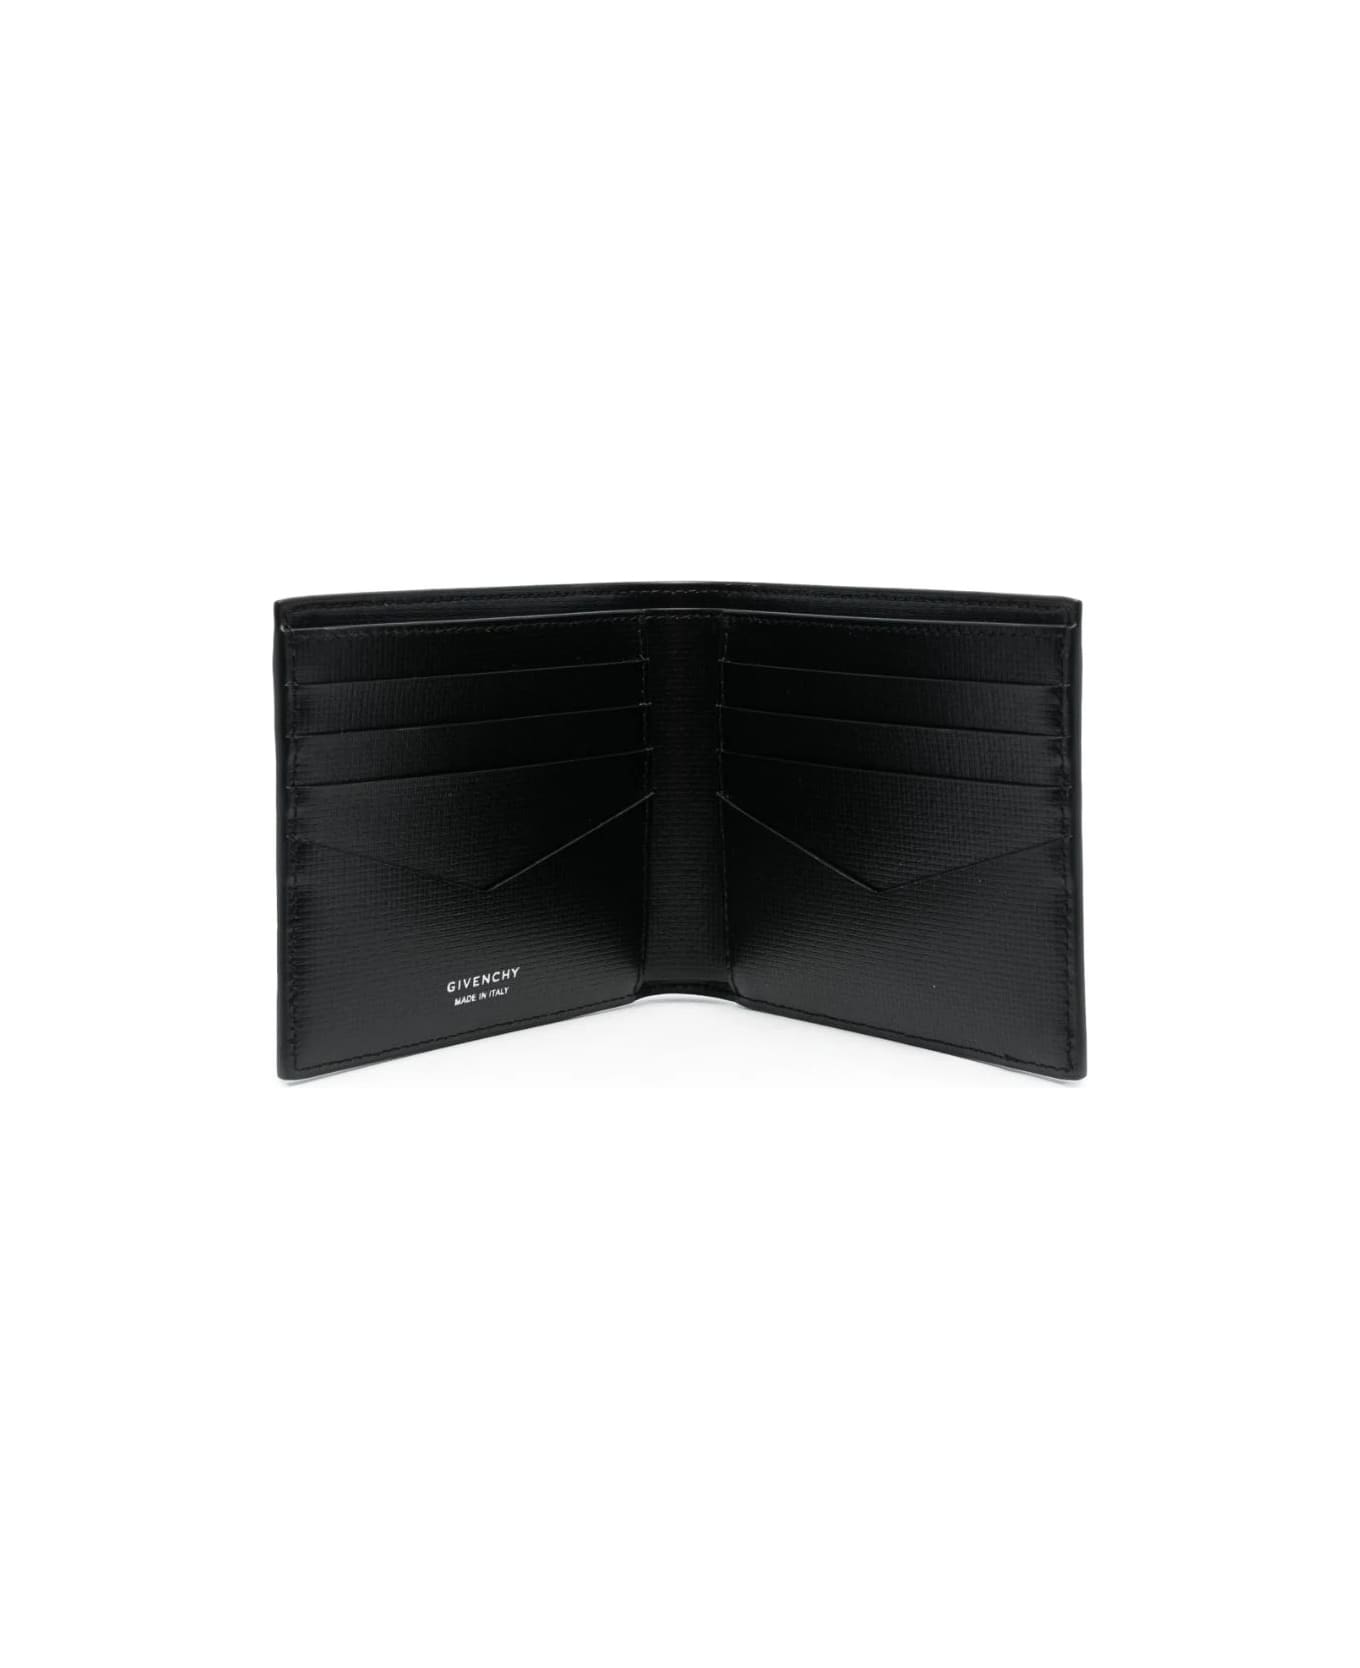 Givenchy Wallet In Black Classique 4g Leather - Black 財布